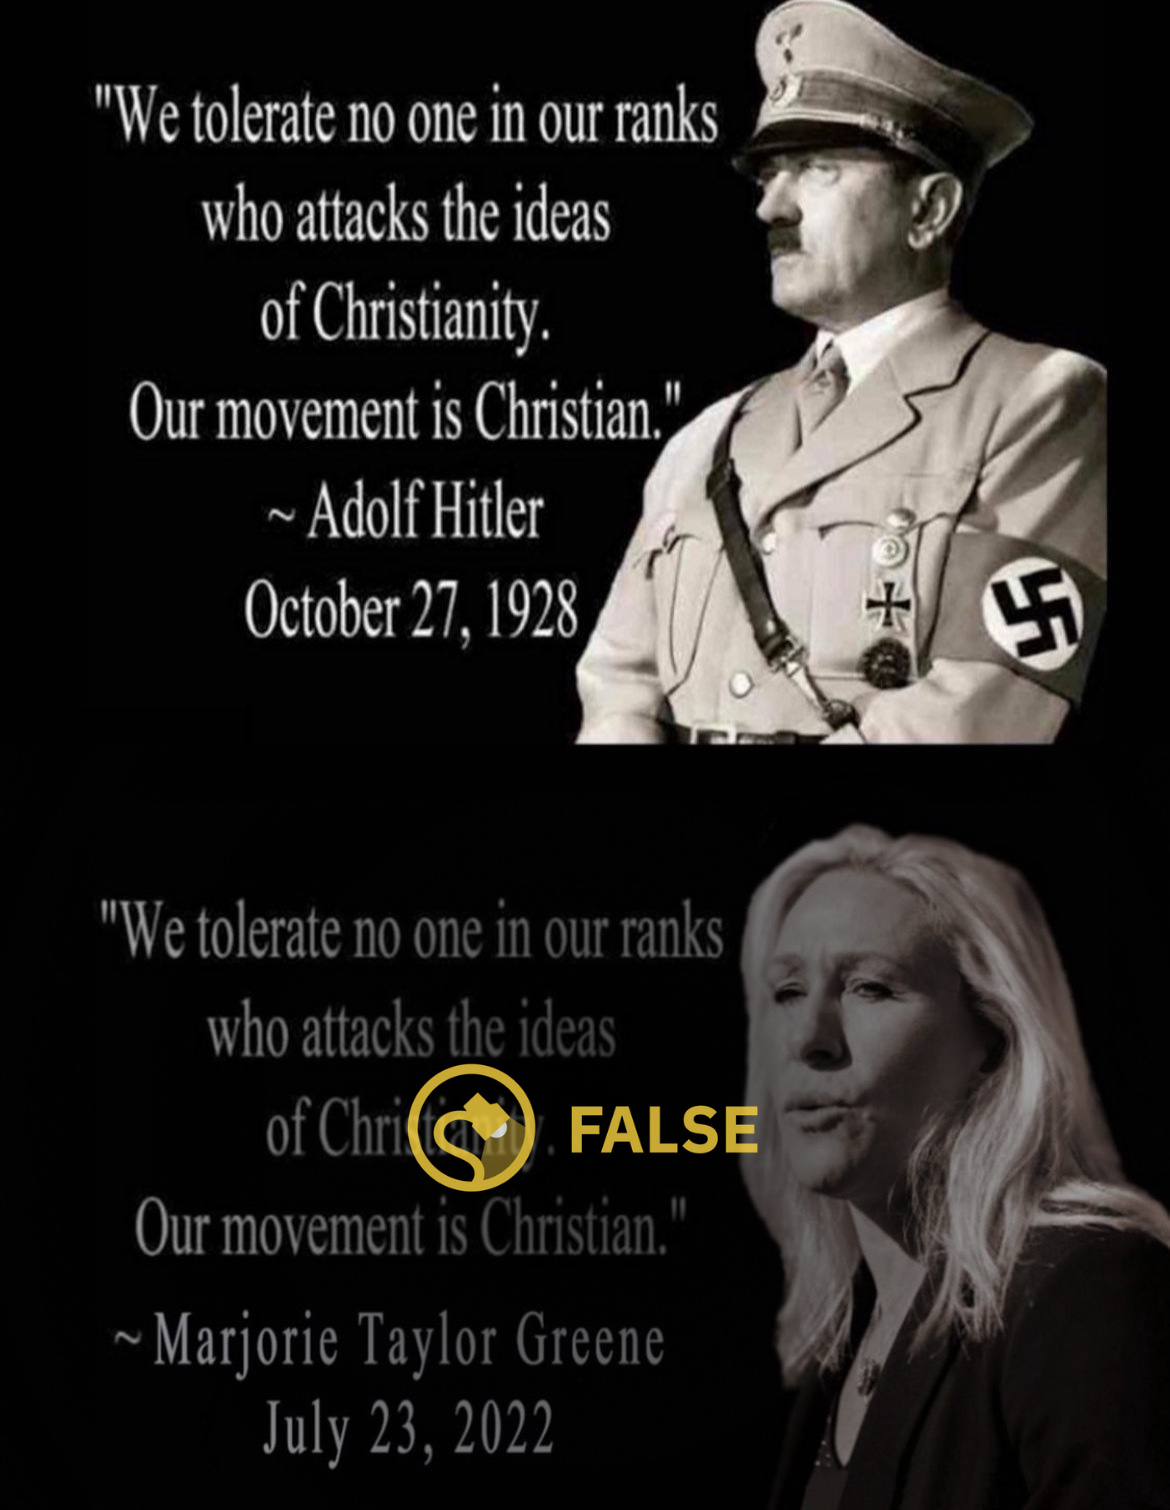 A meme claimed that Adolf Hitler and Marjorie Taylor Greene said we tolerate no one in our ranks who attacks the ideas of Christianity and that our movement is Christian.